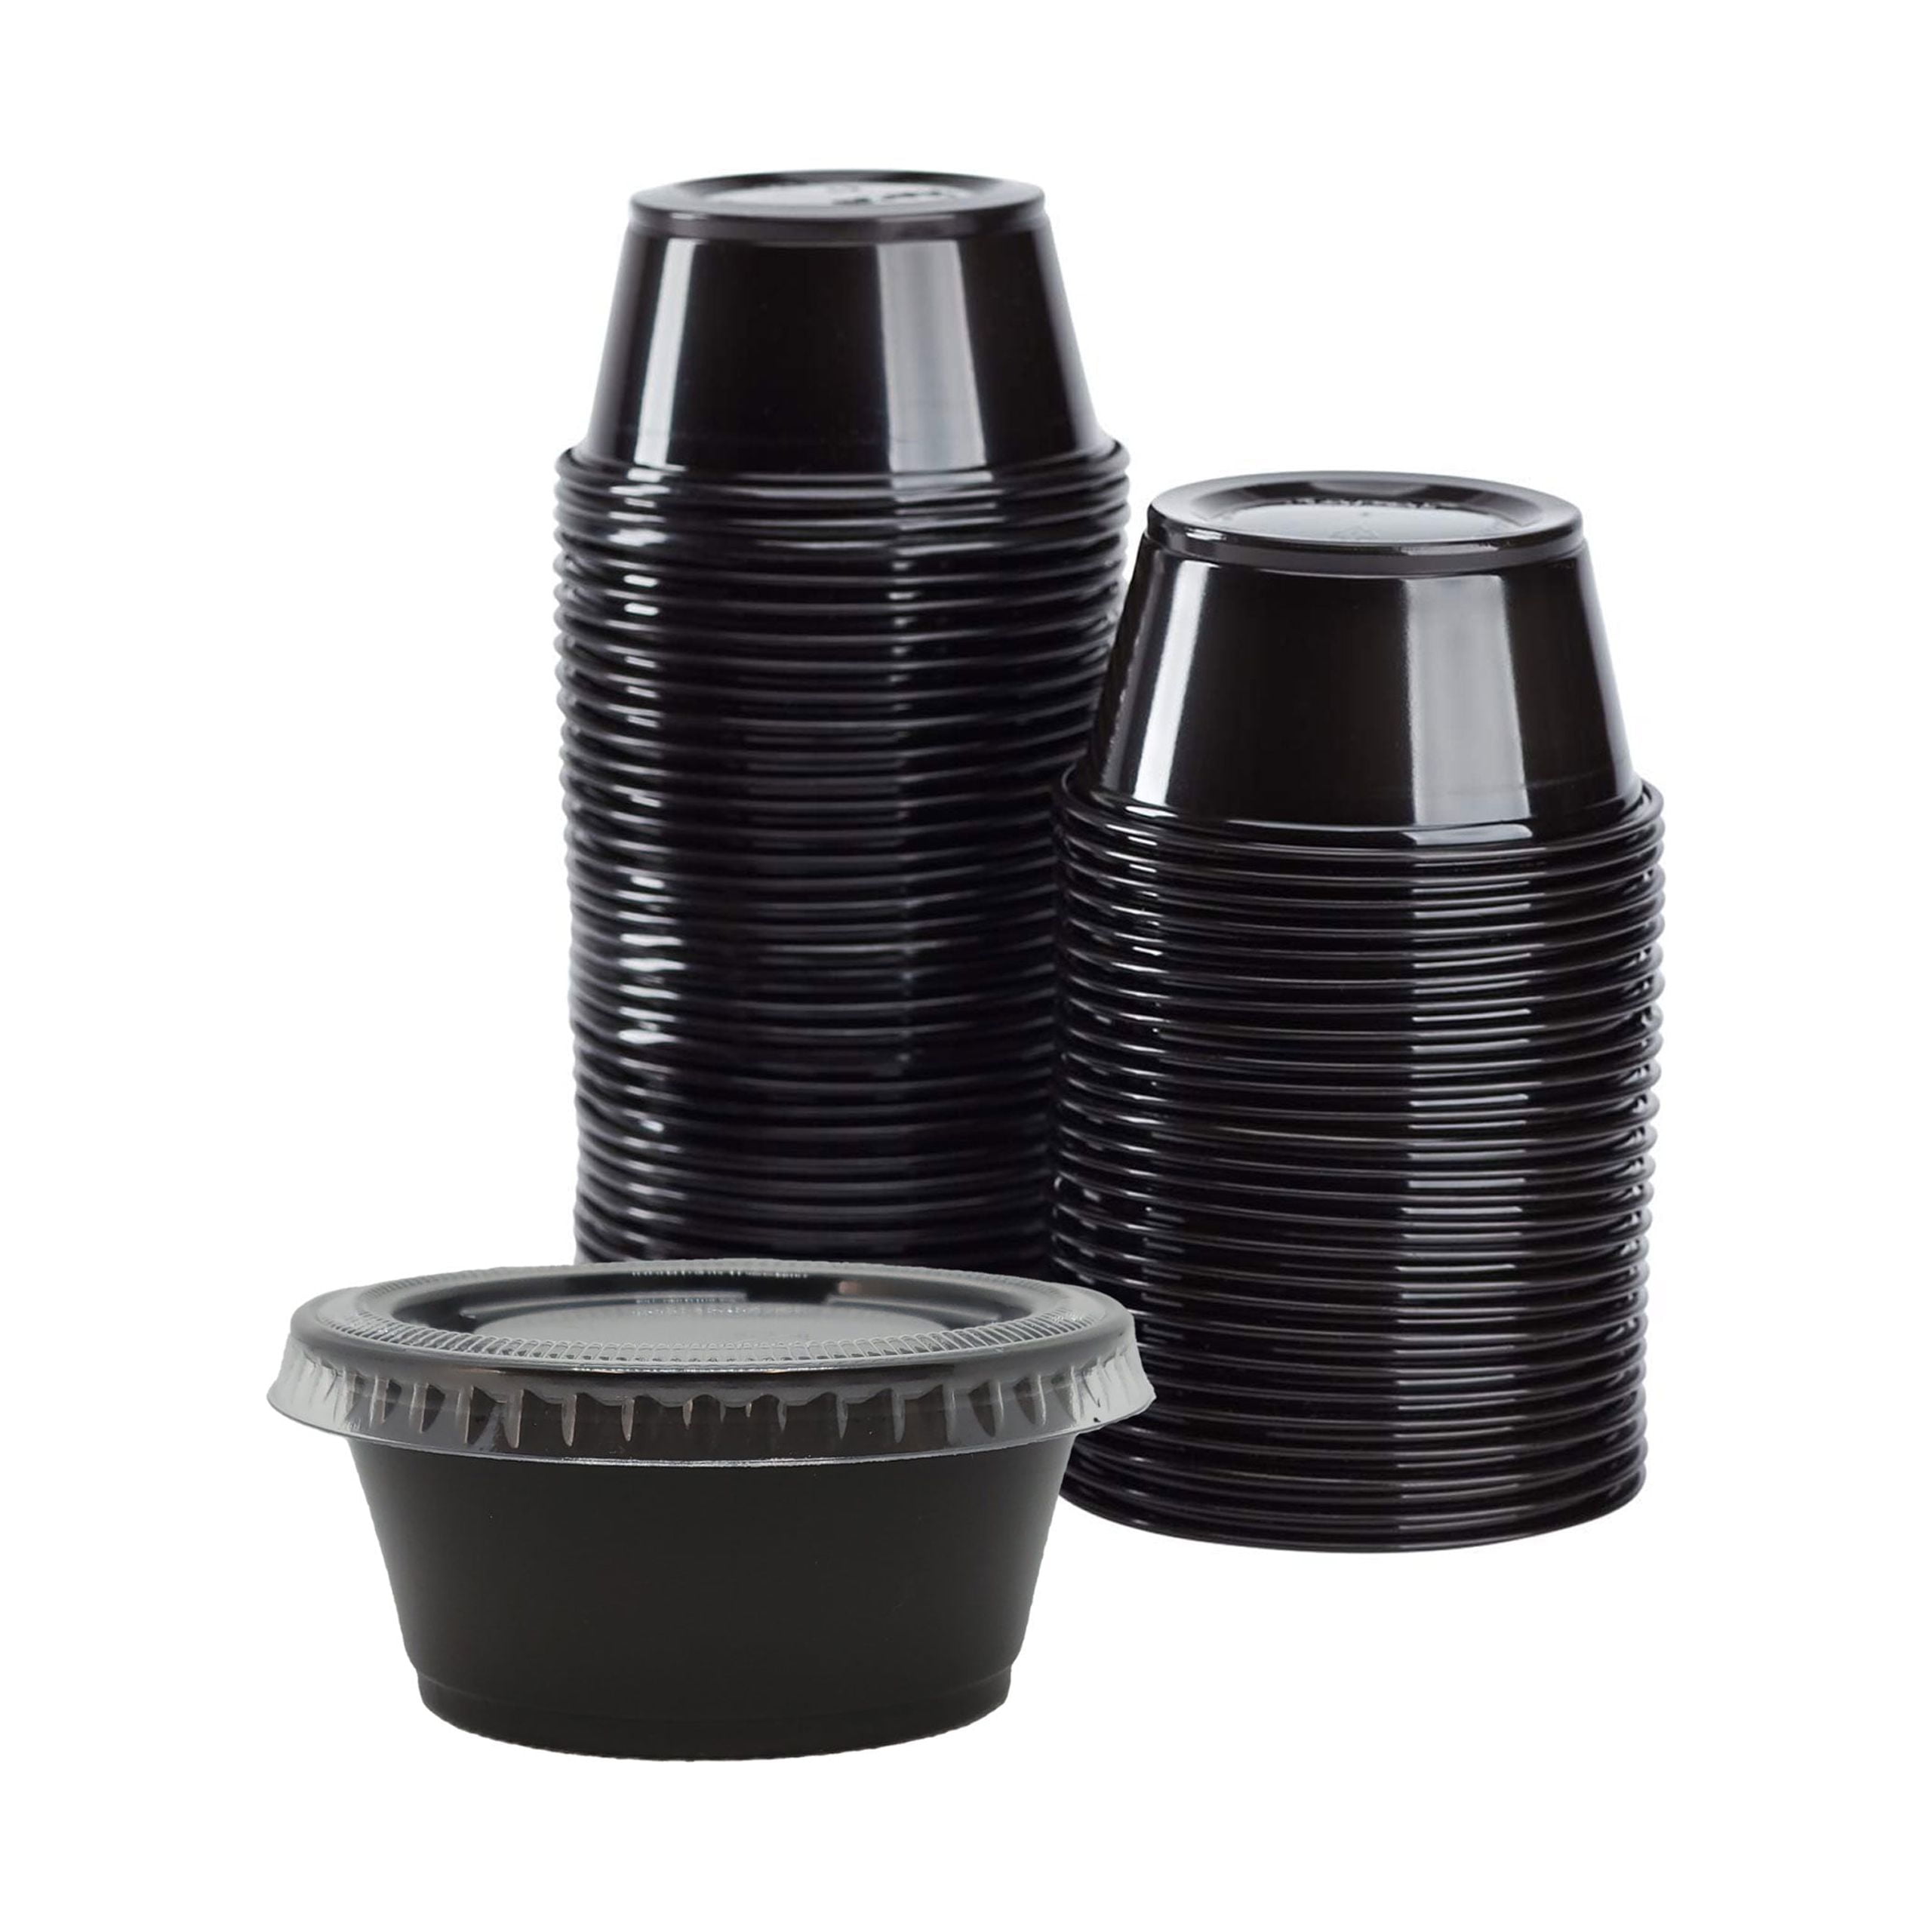 Kitcheniva Plastic Clear Disposable Portion Cups With Lids Black 2oz - 100  Set, Set of 100 - Harris Teeter